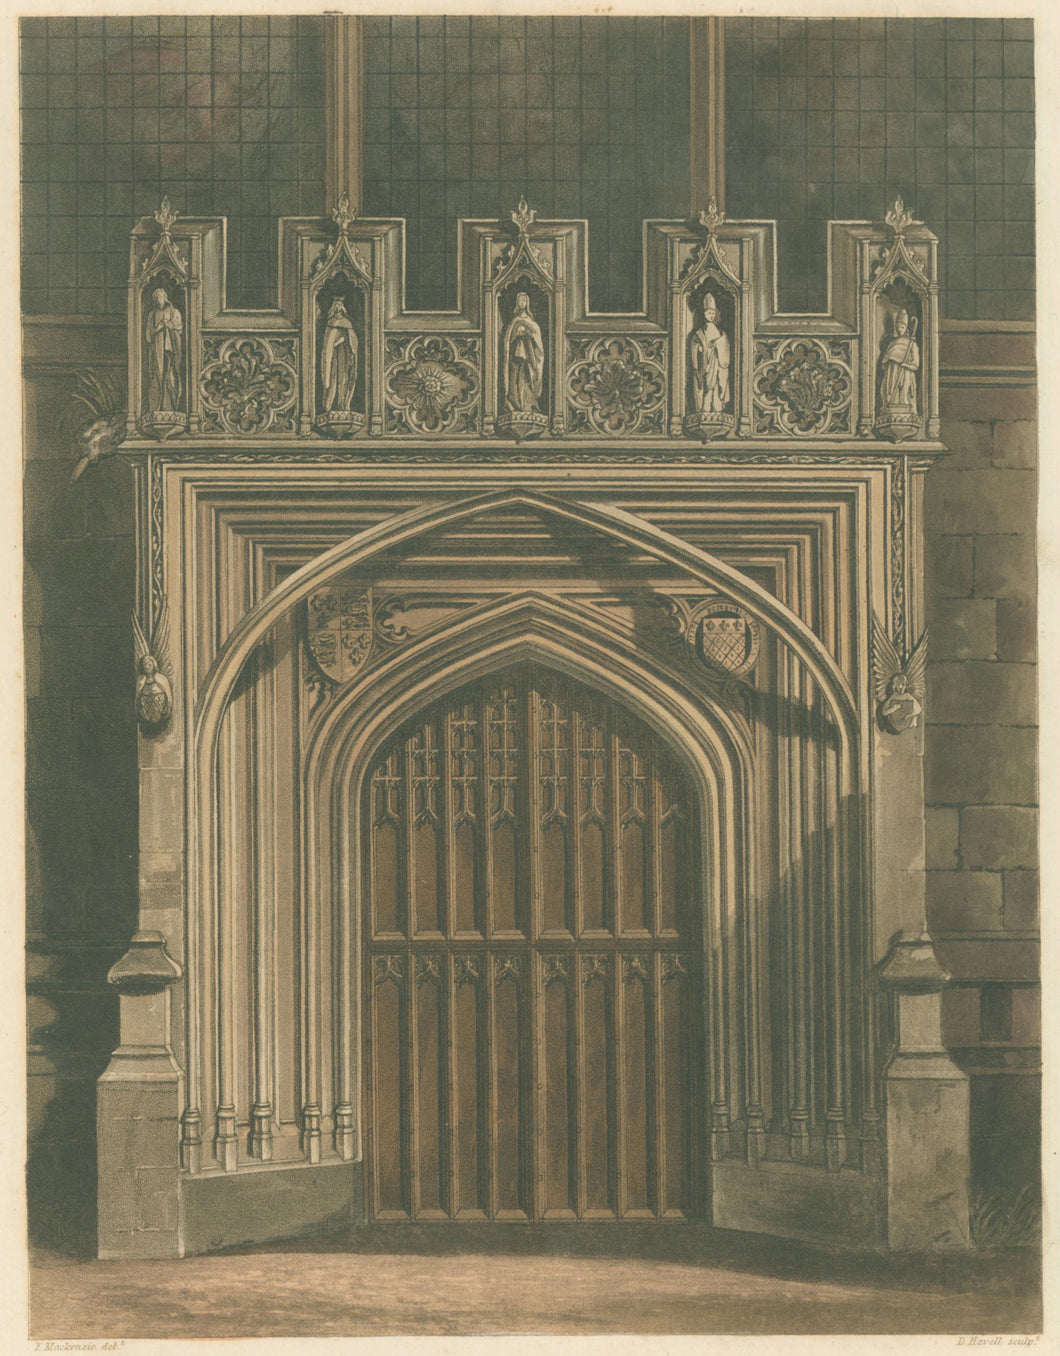 Mackenzie, F. “West Entrance to the Chapel of Magdalen College”